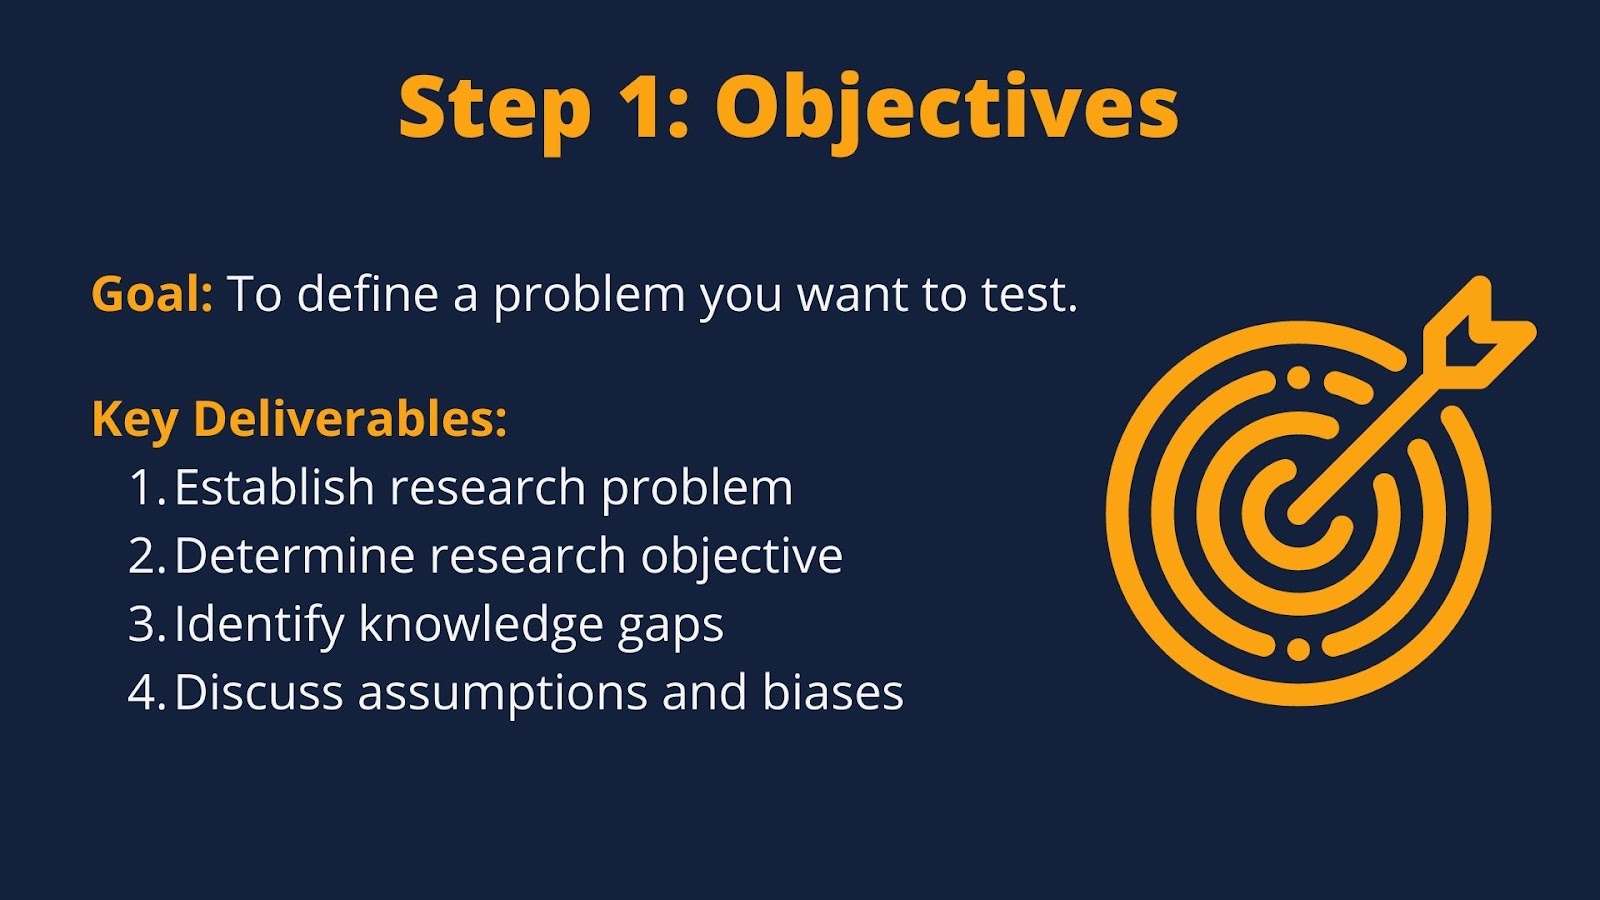 User Experience (UX) Research Learning Spiral Step 1: Objectives. Image describes goals and key deliverables of this stage. 